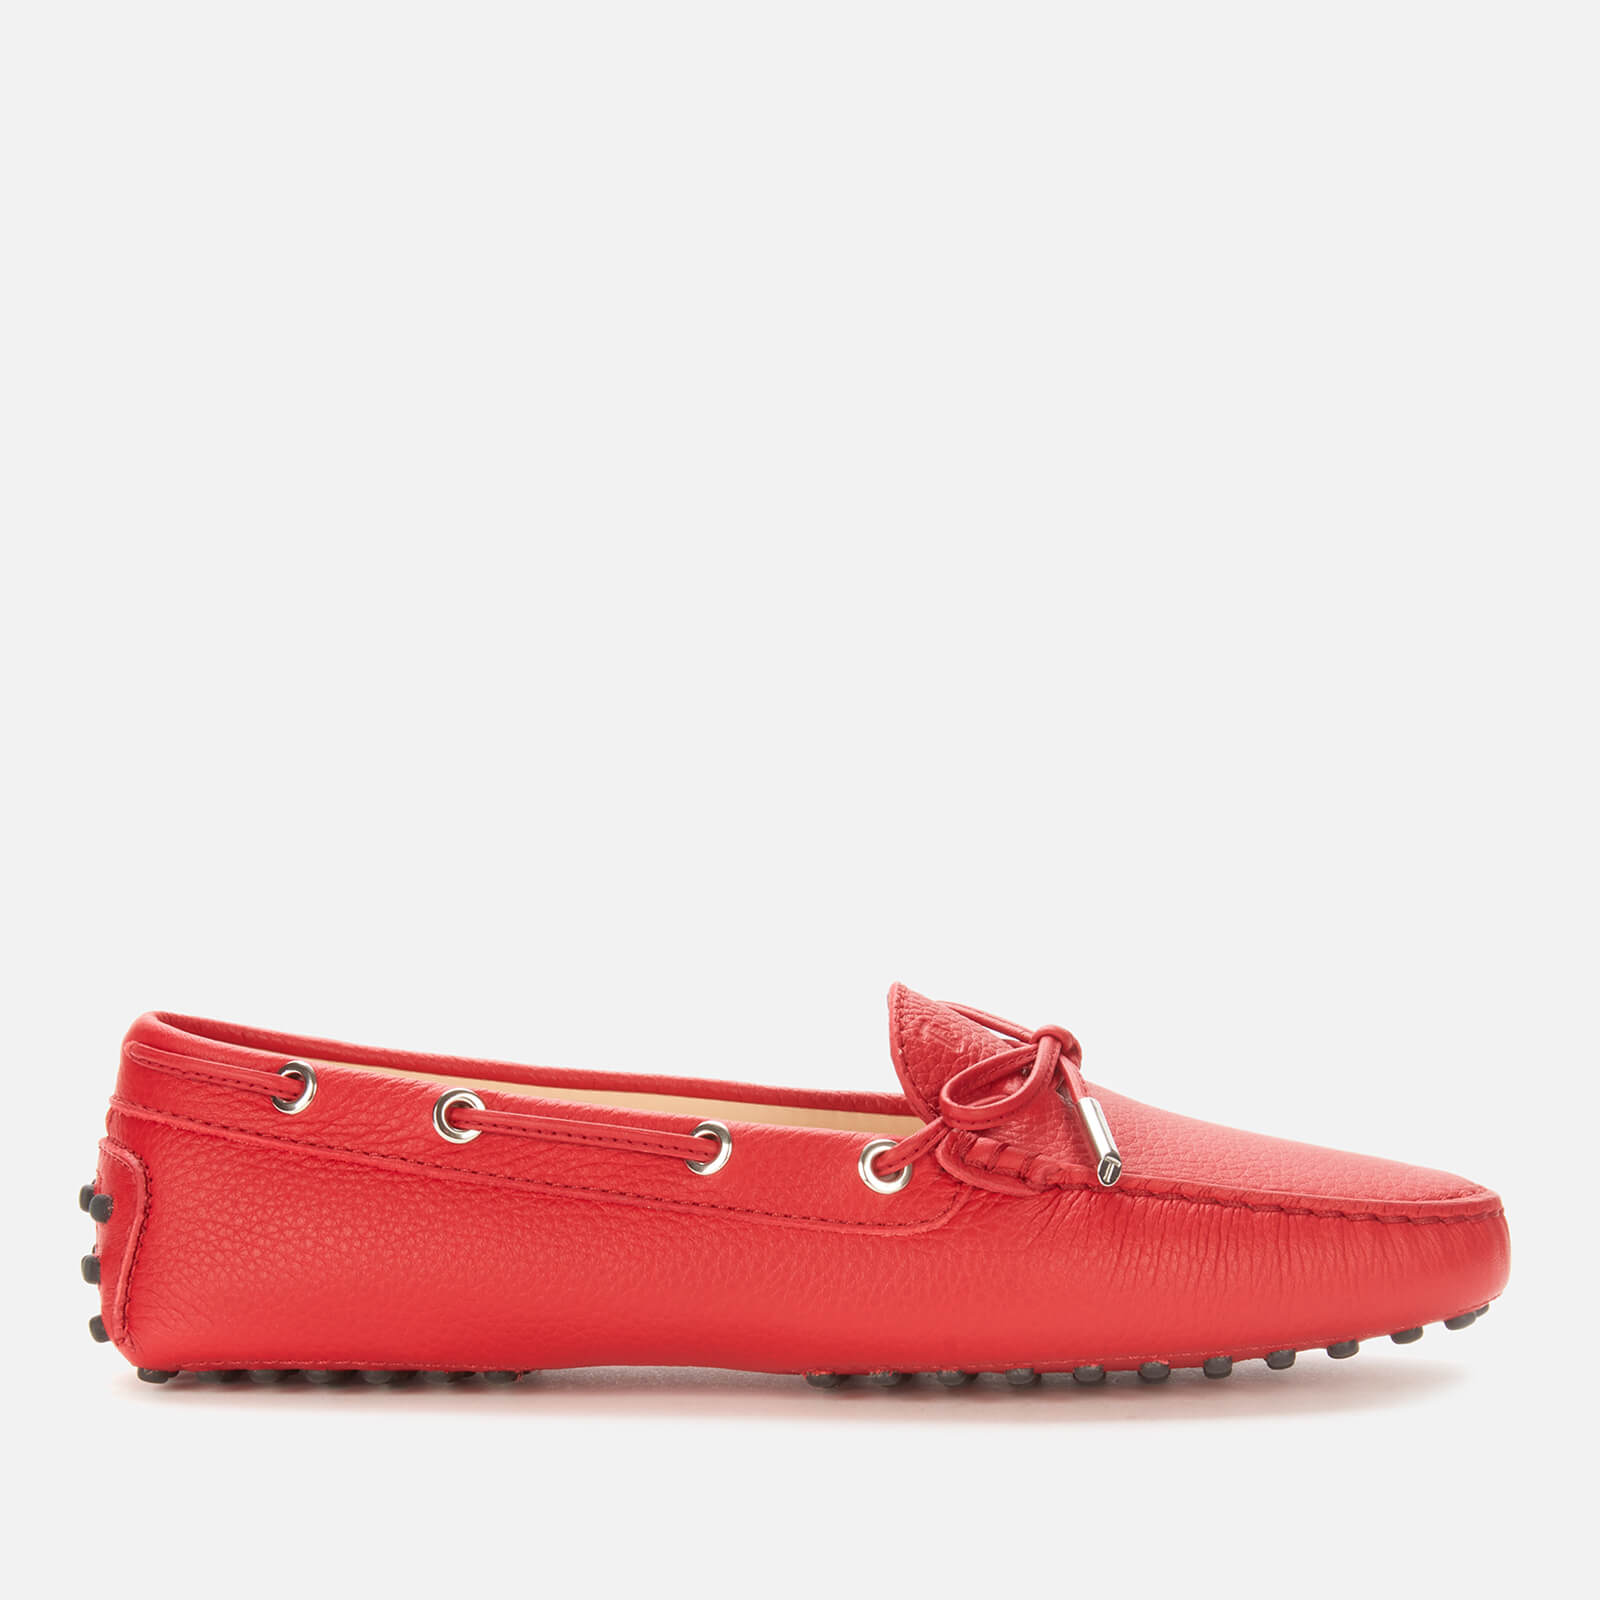 Tod's Women's Heaven Suede Driving Shoes - Red - UK 3